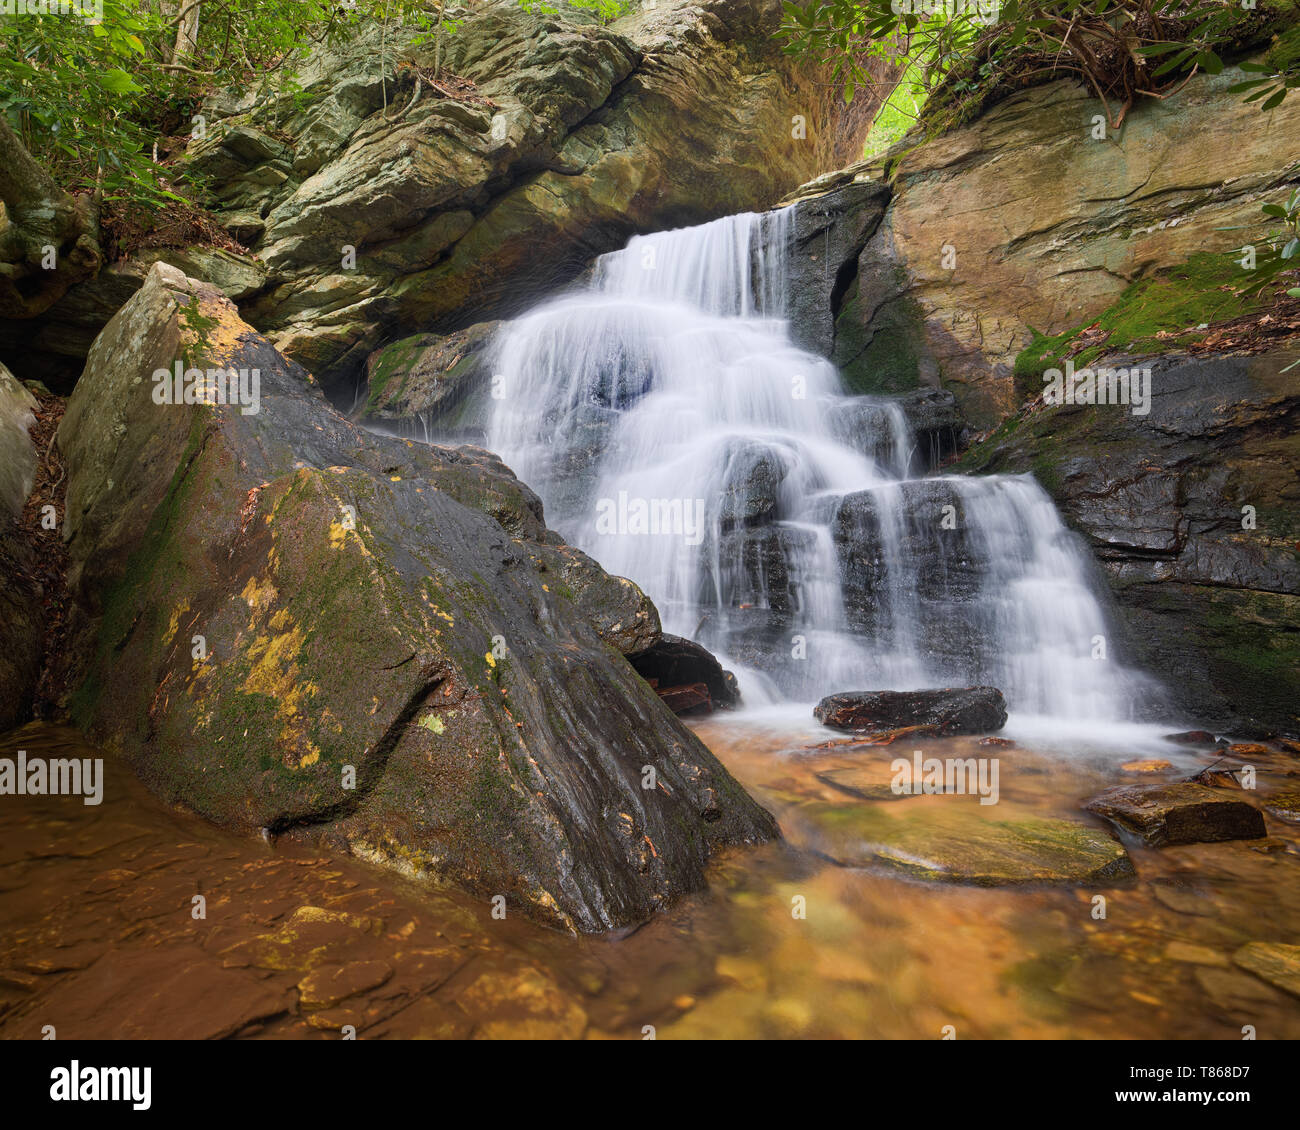 Base of Upper Cascade waterfall in Hanging Rock State Park, North Carolina, Scenic nature landscape photograph. Stock Photo